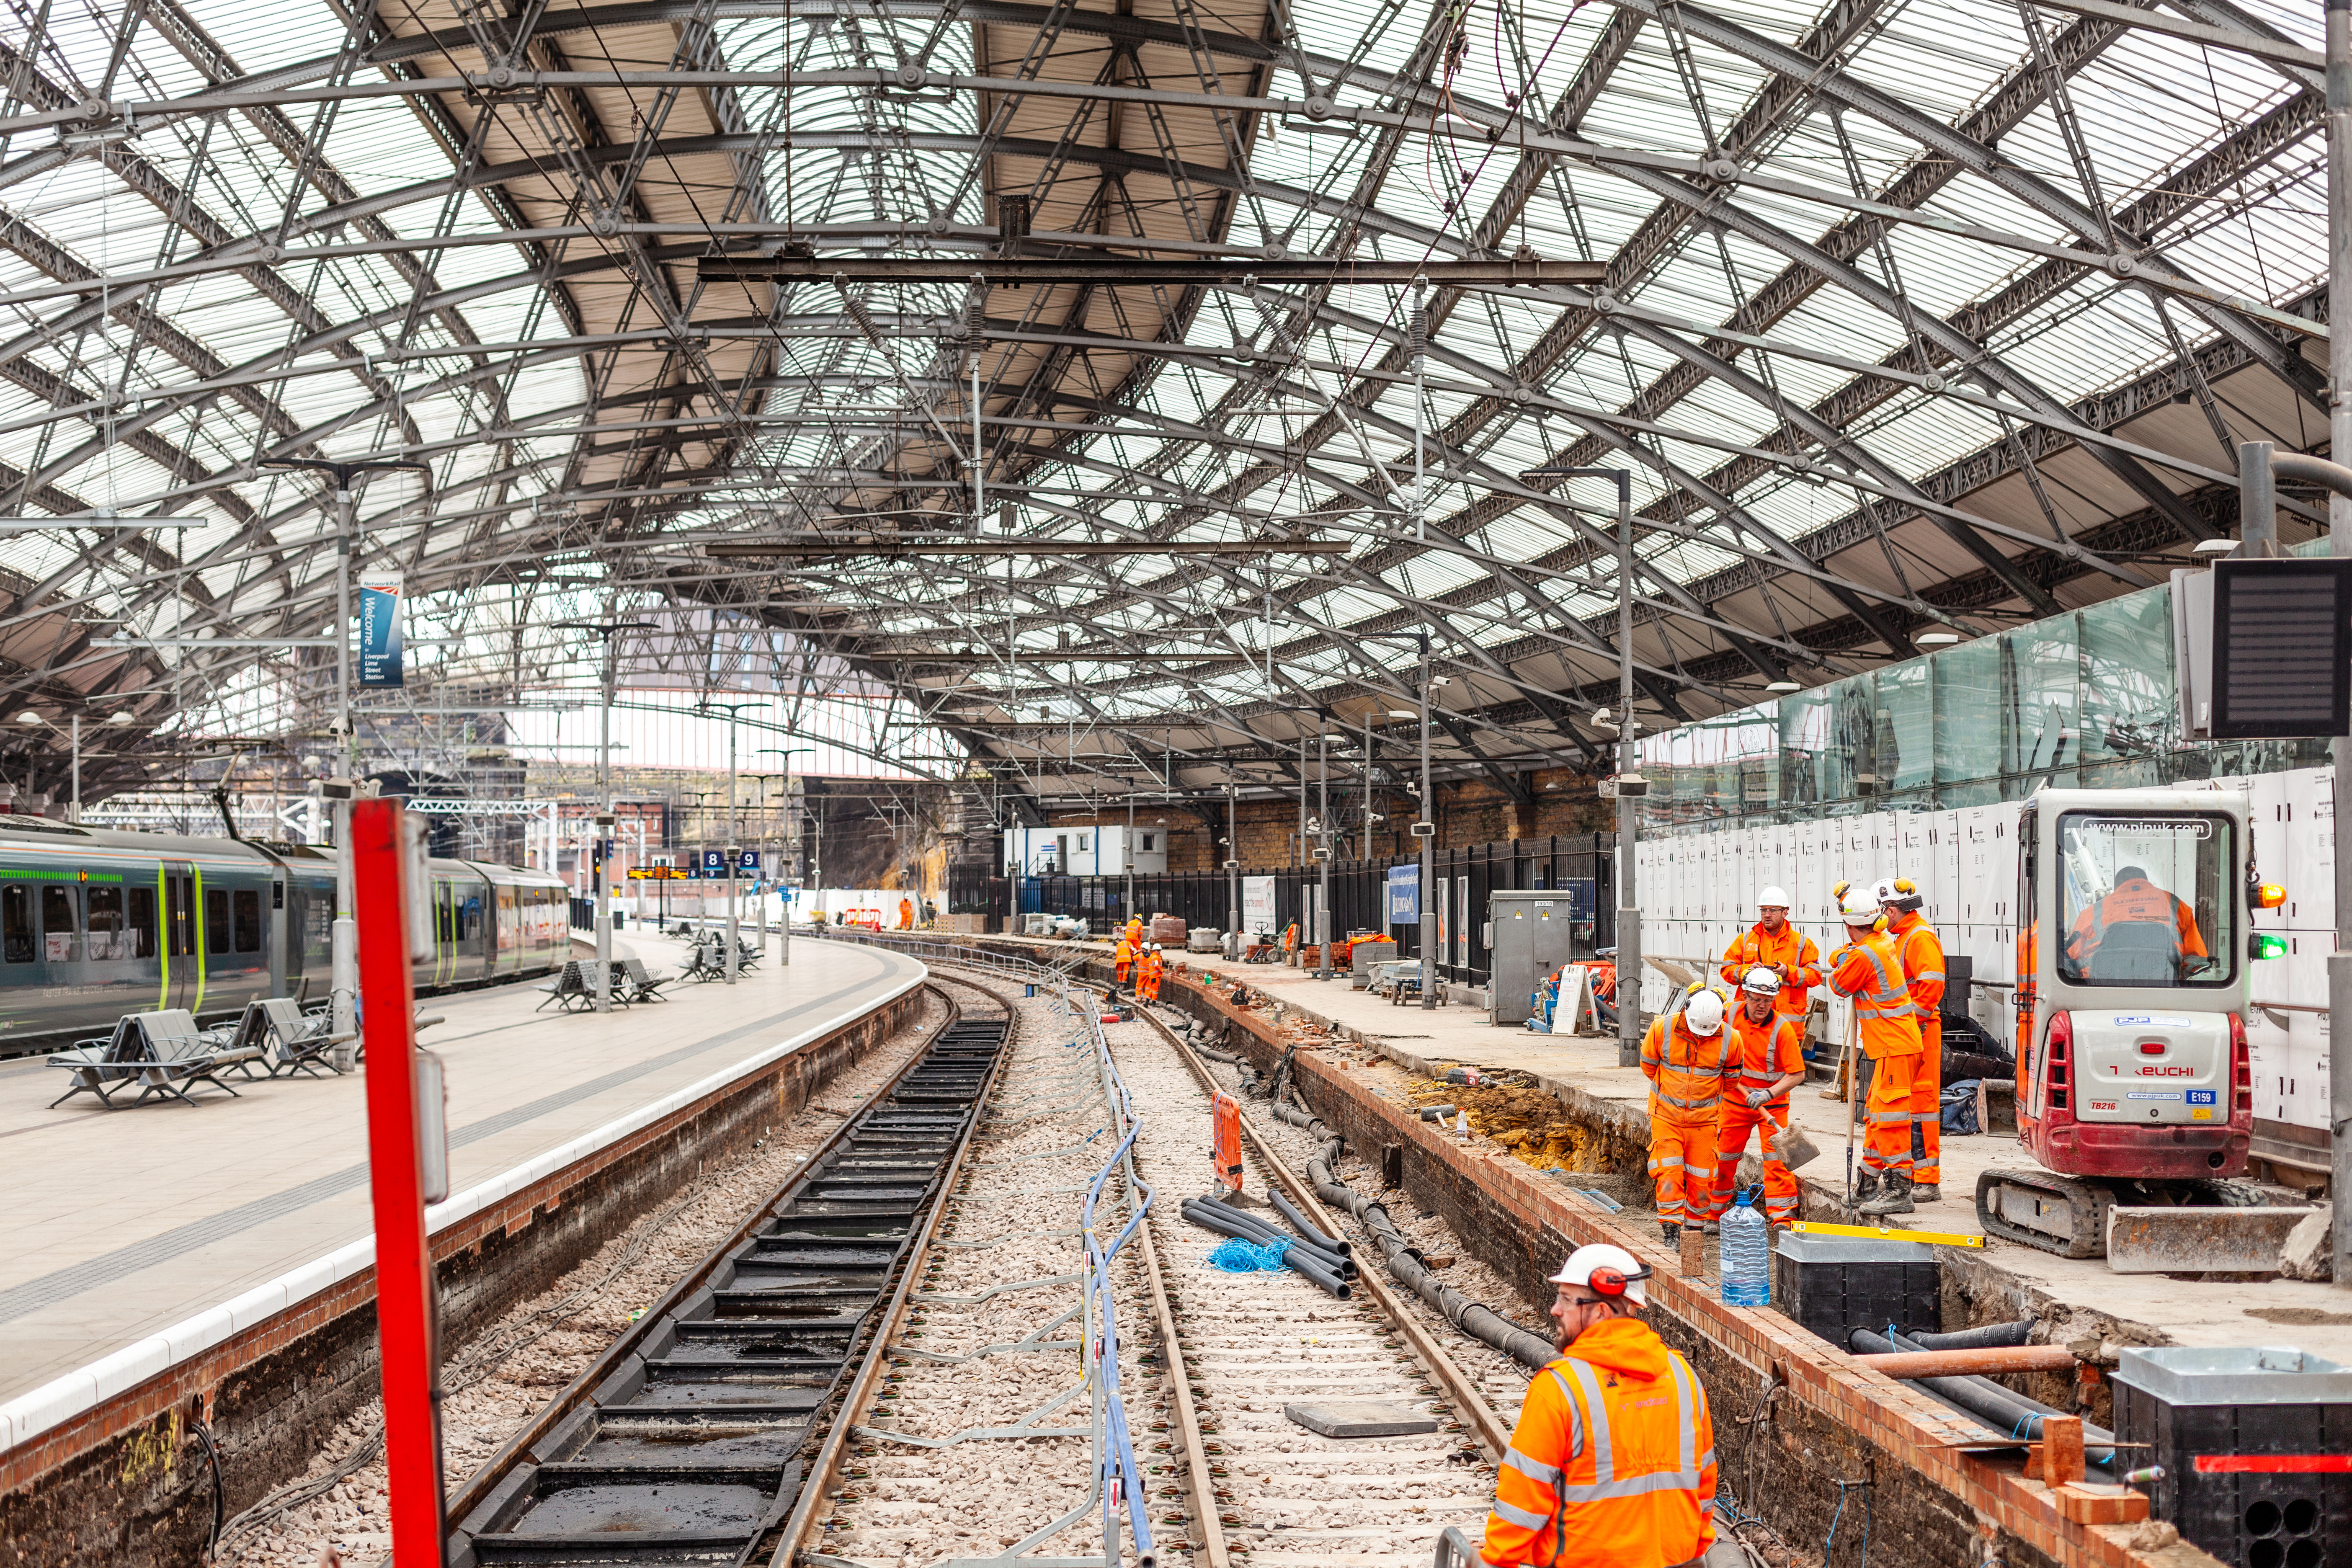 Liverpool, UK - April 11, 2018: A team of rail track maintenance workers inspecting and repairing a railway track while a train passes by during the day in Liverpool Lime Street Station